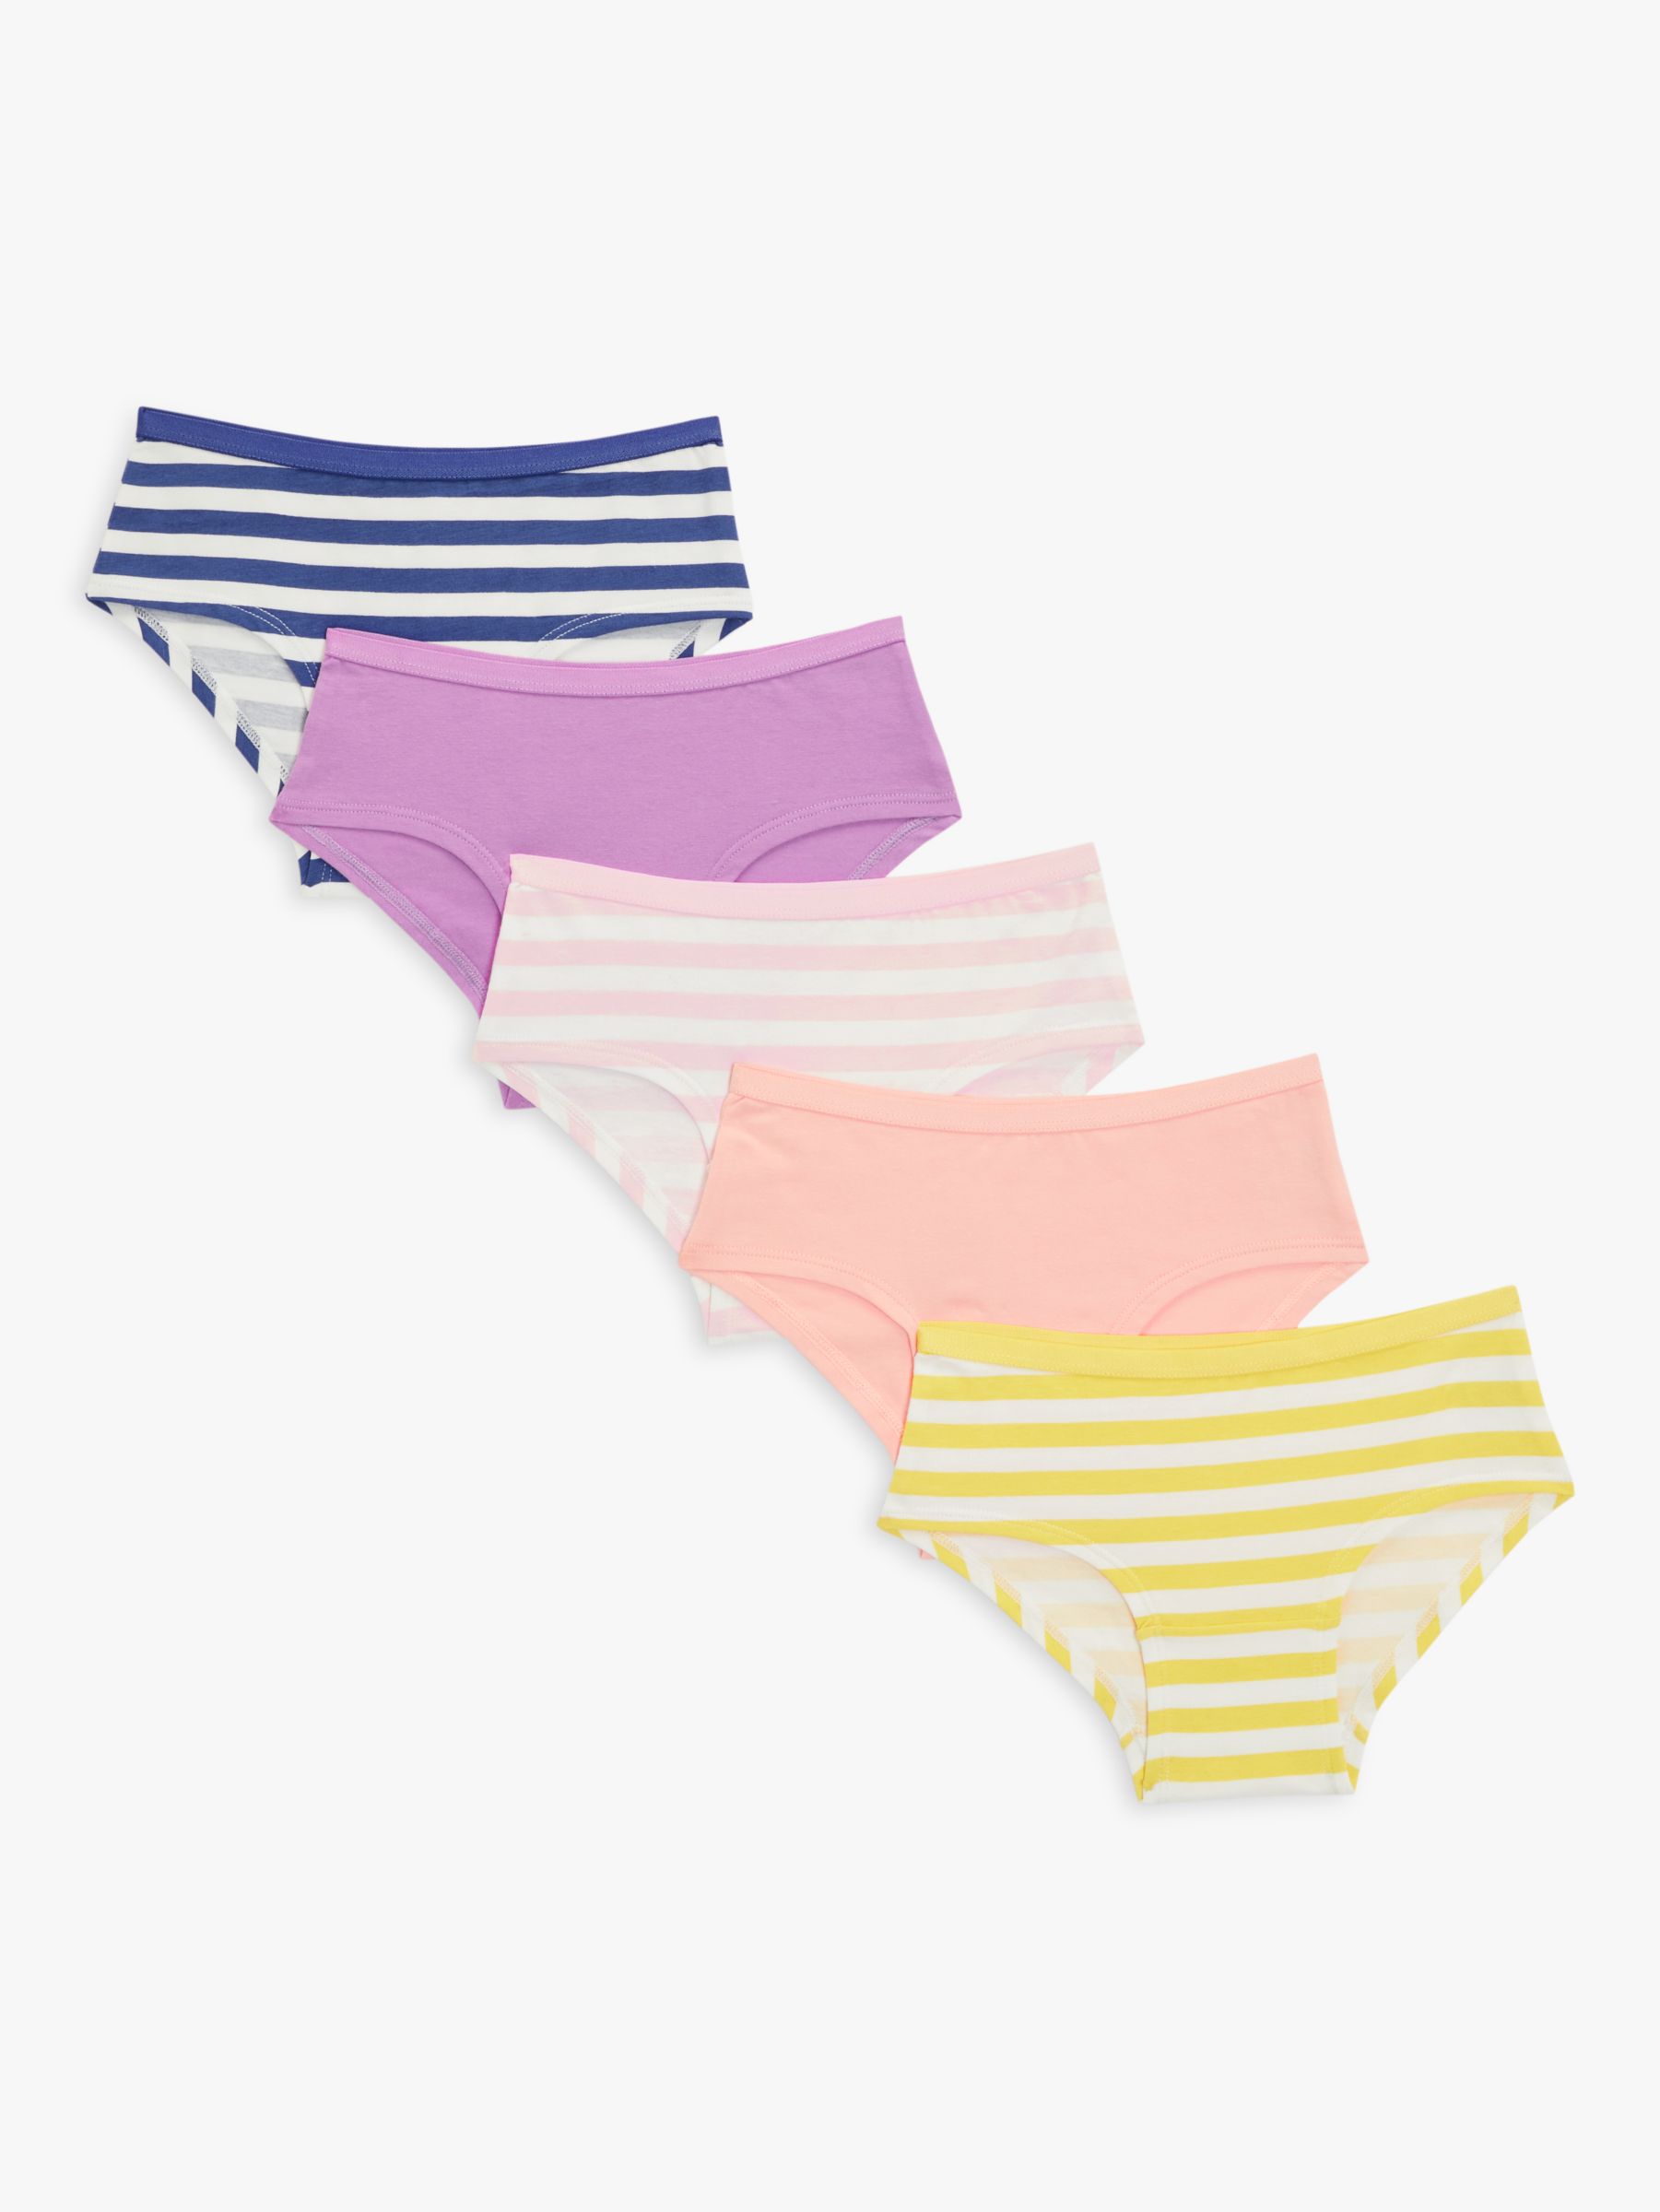 Justice Girls Shades Collection Shortie Undies, 5-Pack, Sizes 6